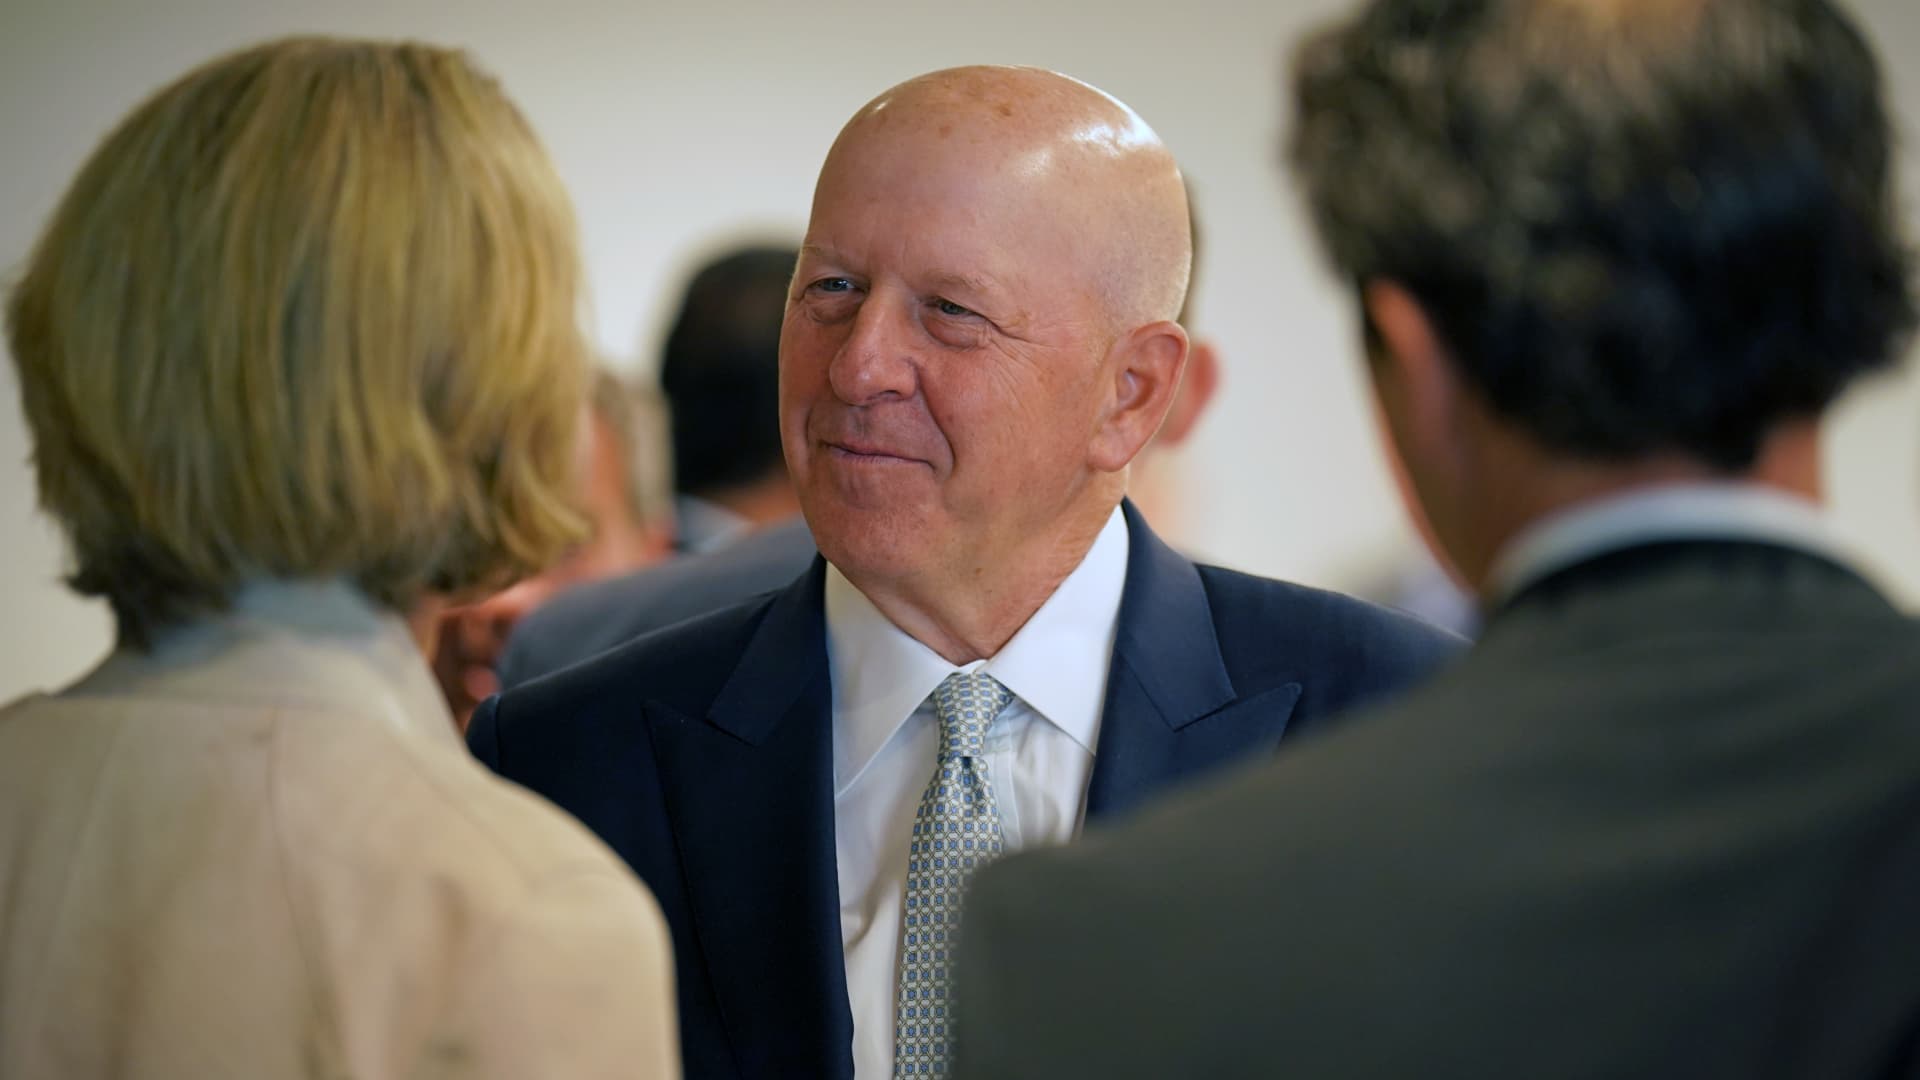 Goldman Sachs unloads another business acquired under CEO David Solomon